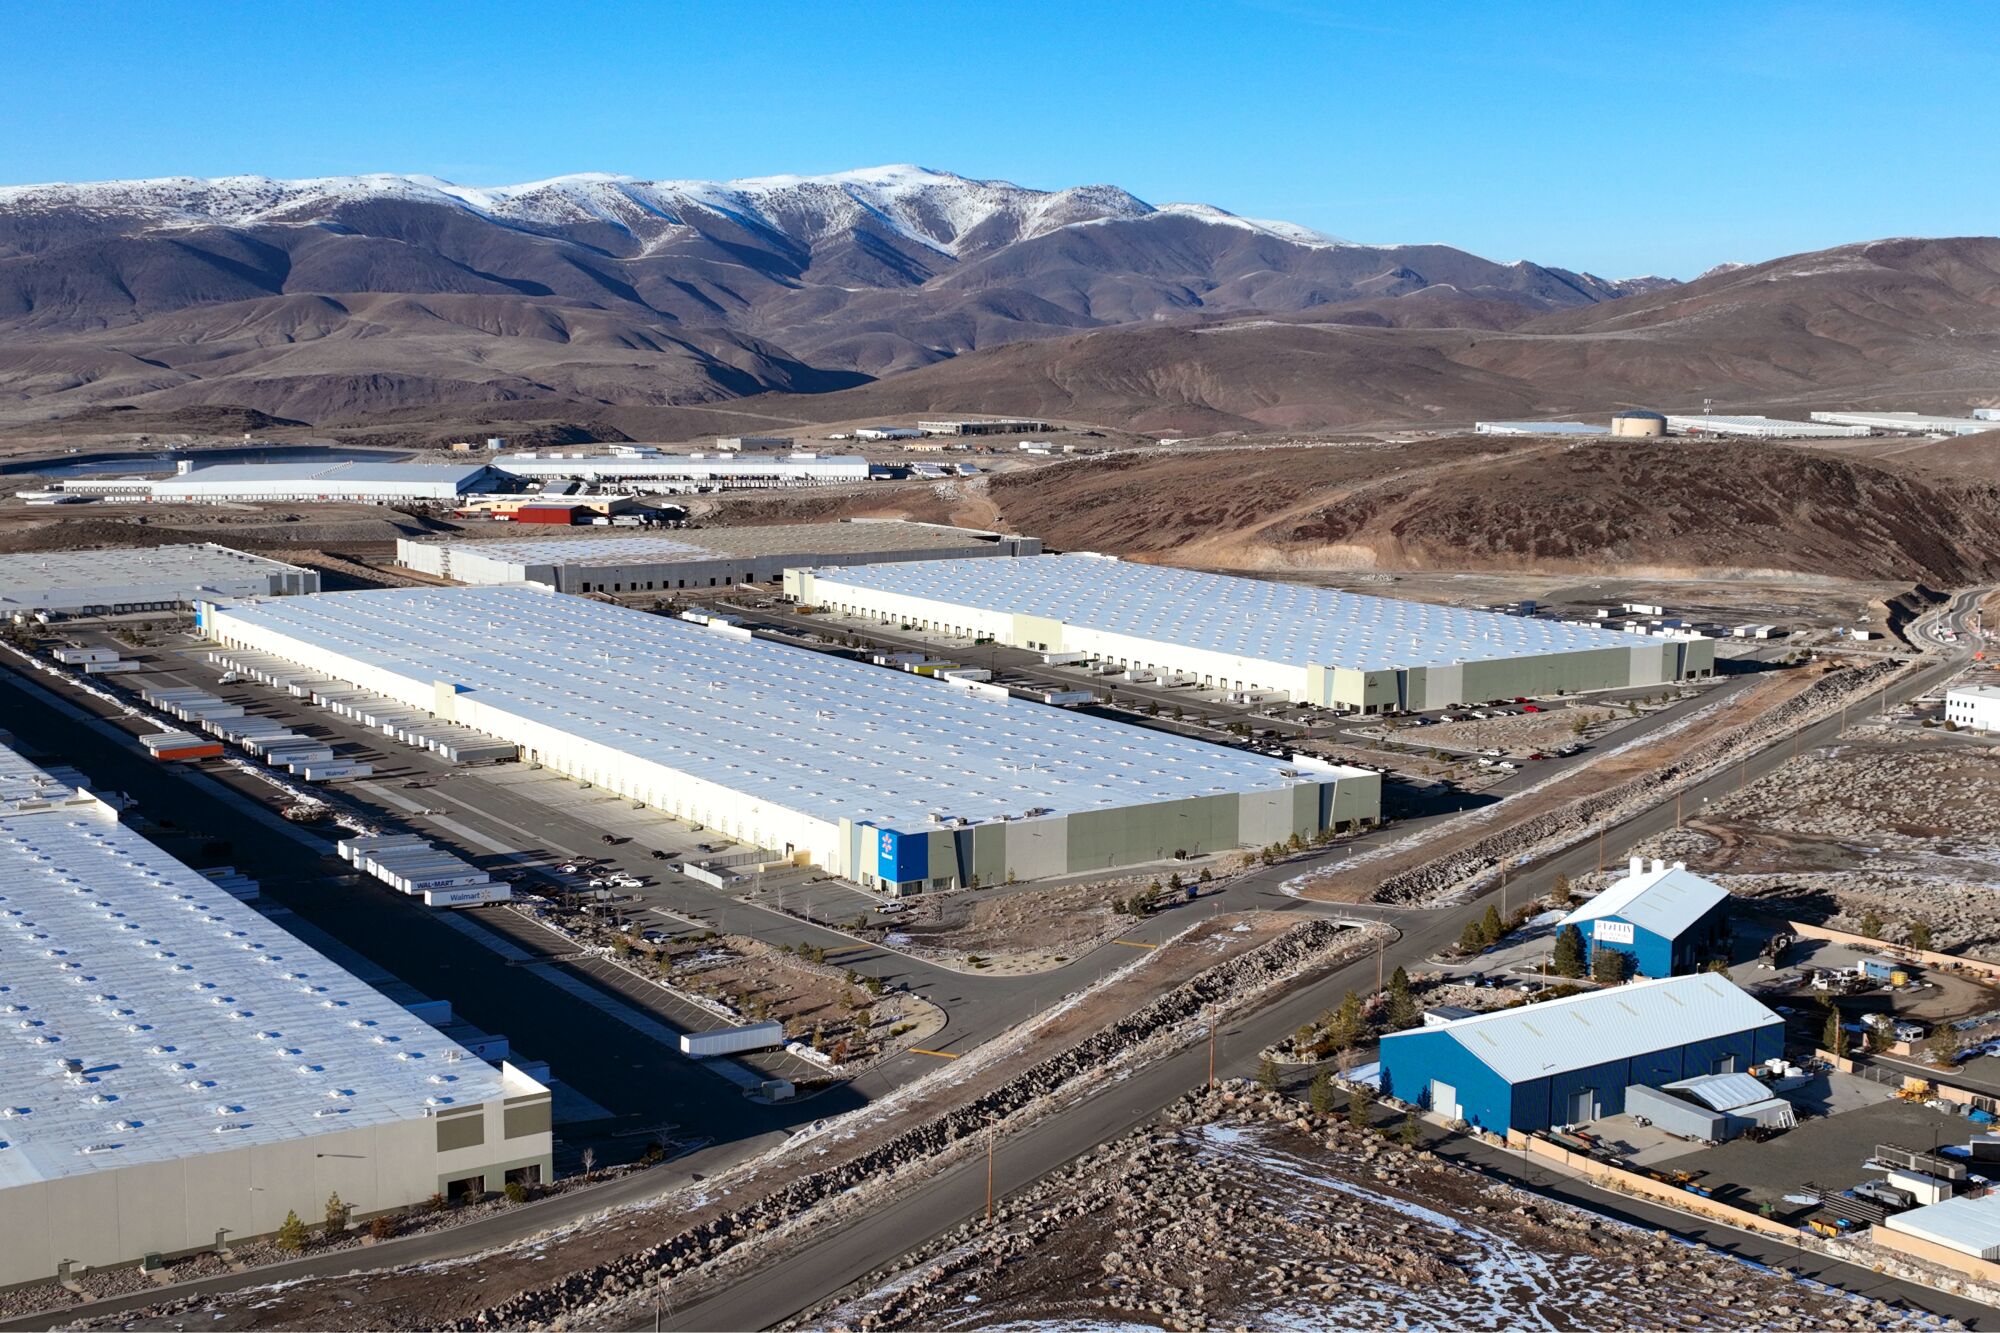 Sprawling warehouses with mountains in the distance.